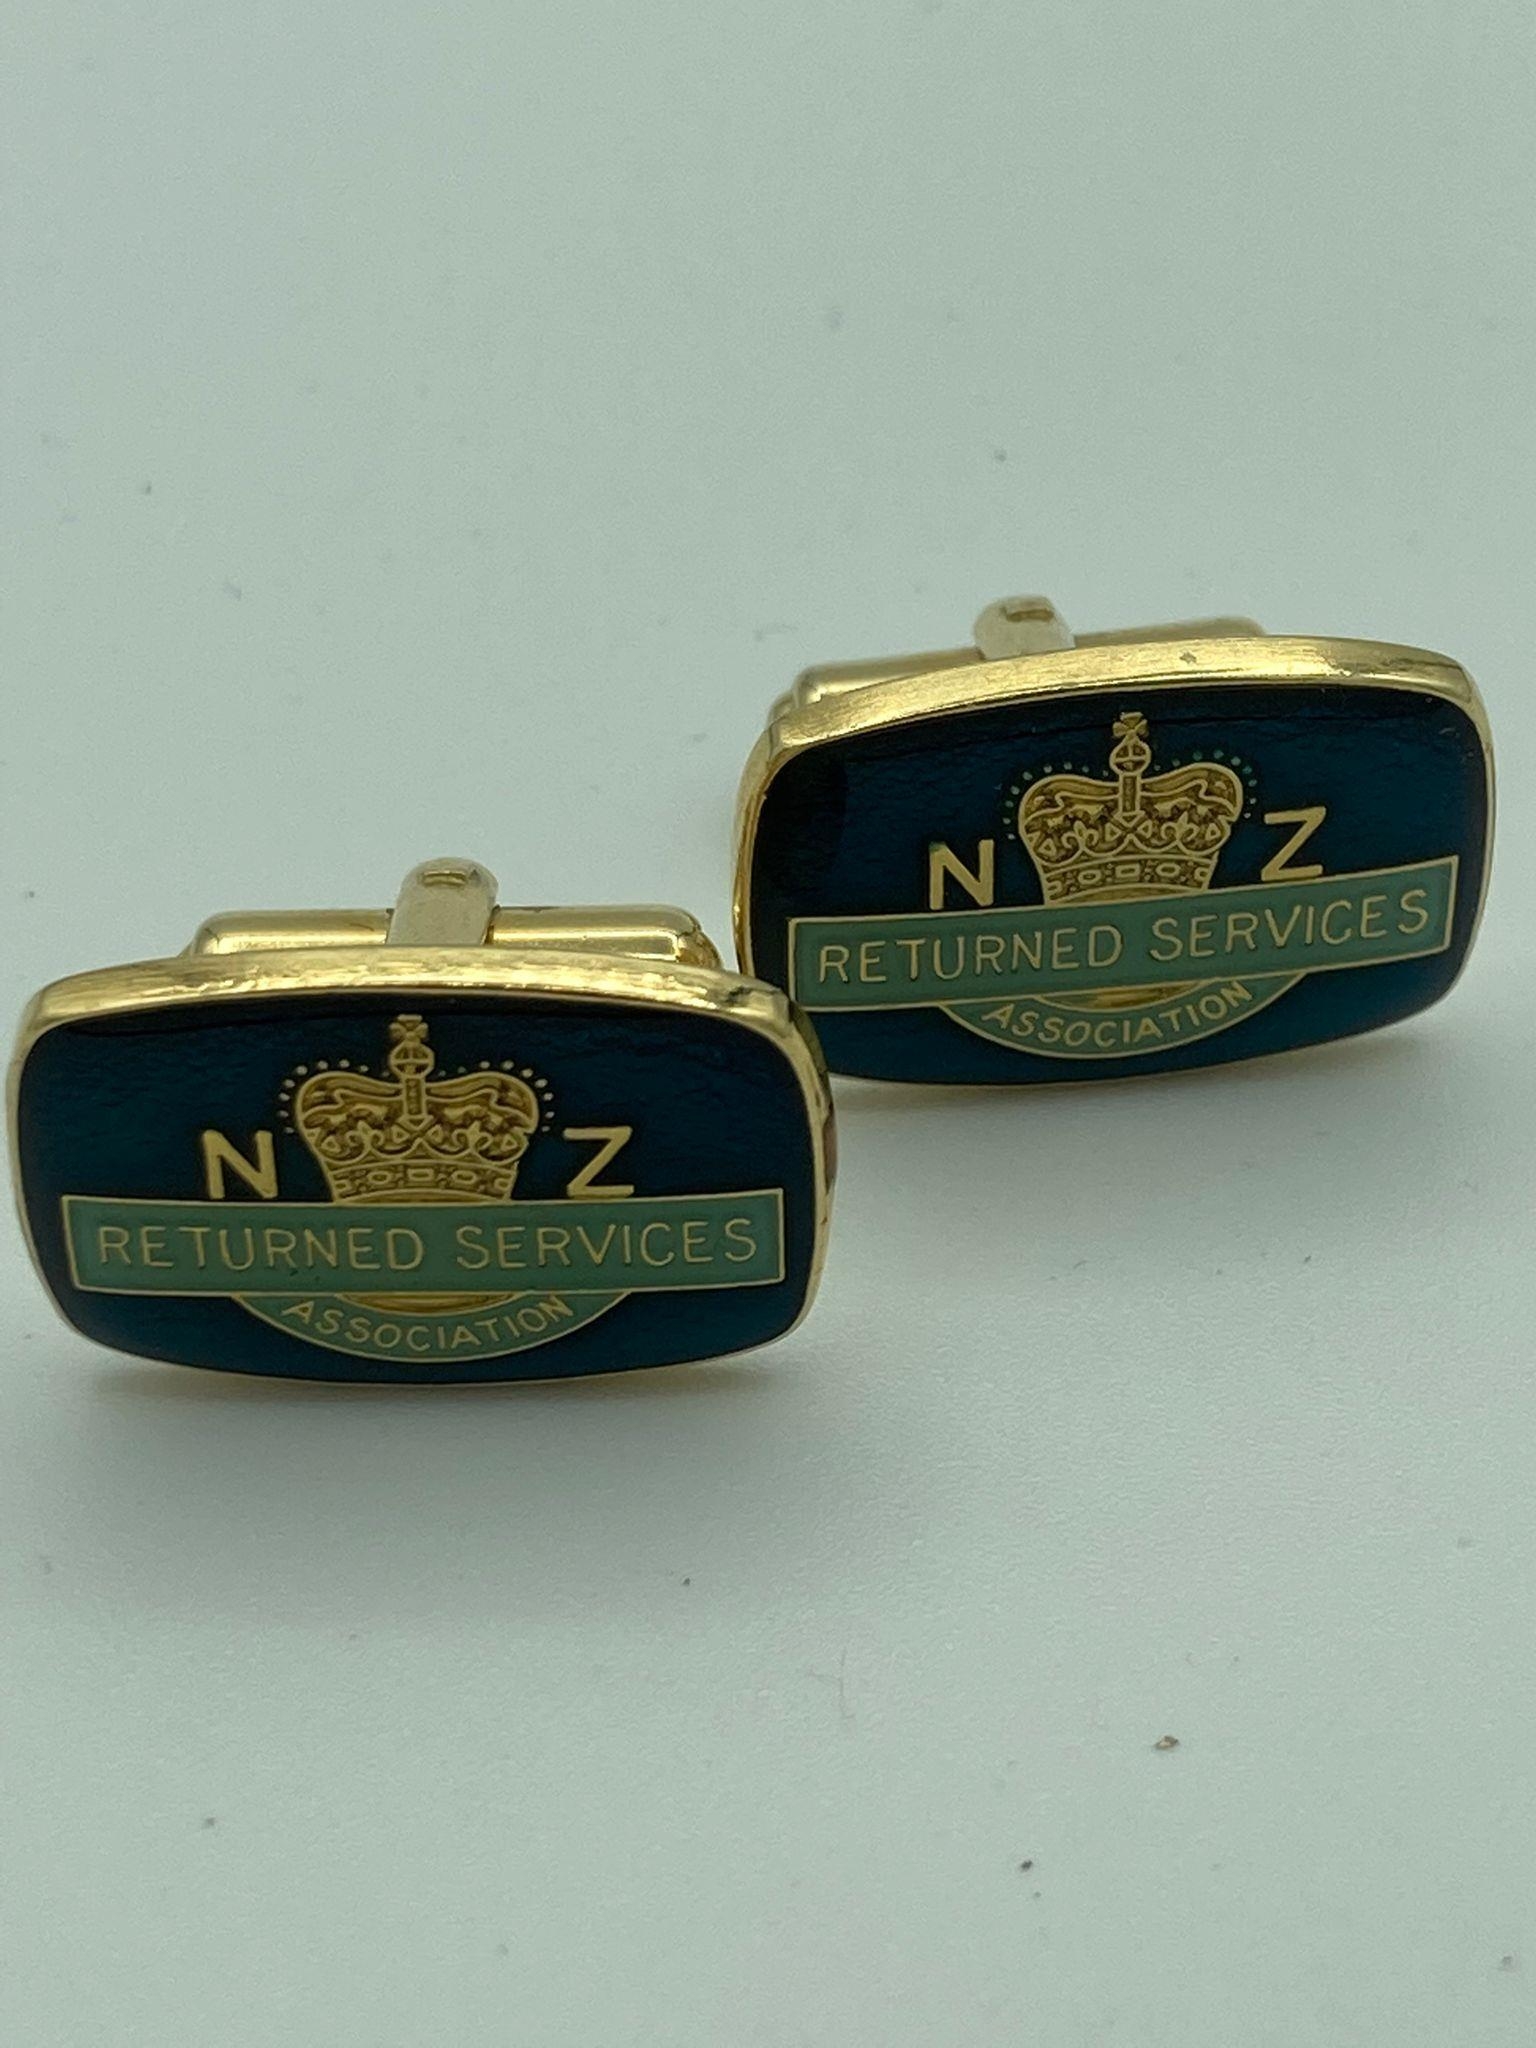 Pair of cufflinks showing New Zealand returned Services Association. Gold tone with attractive